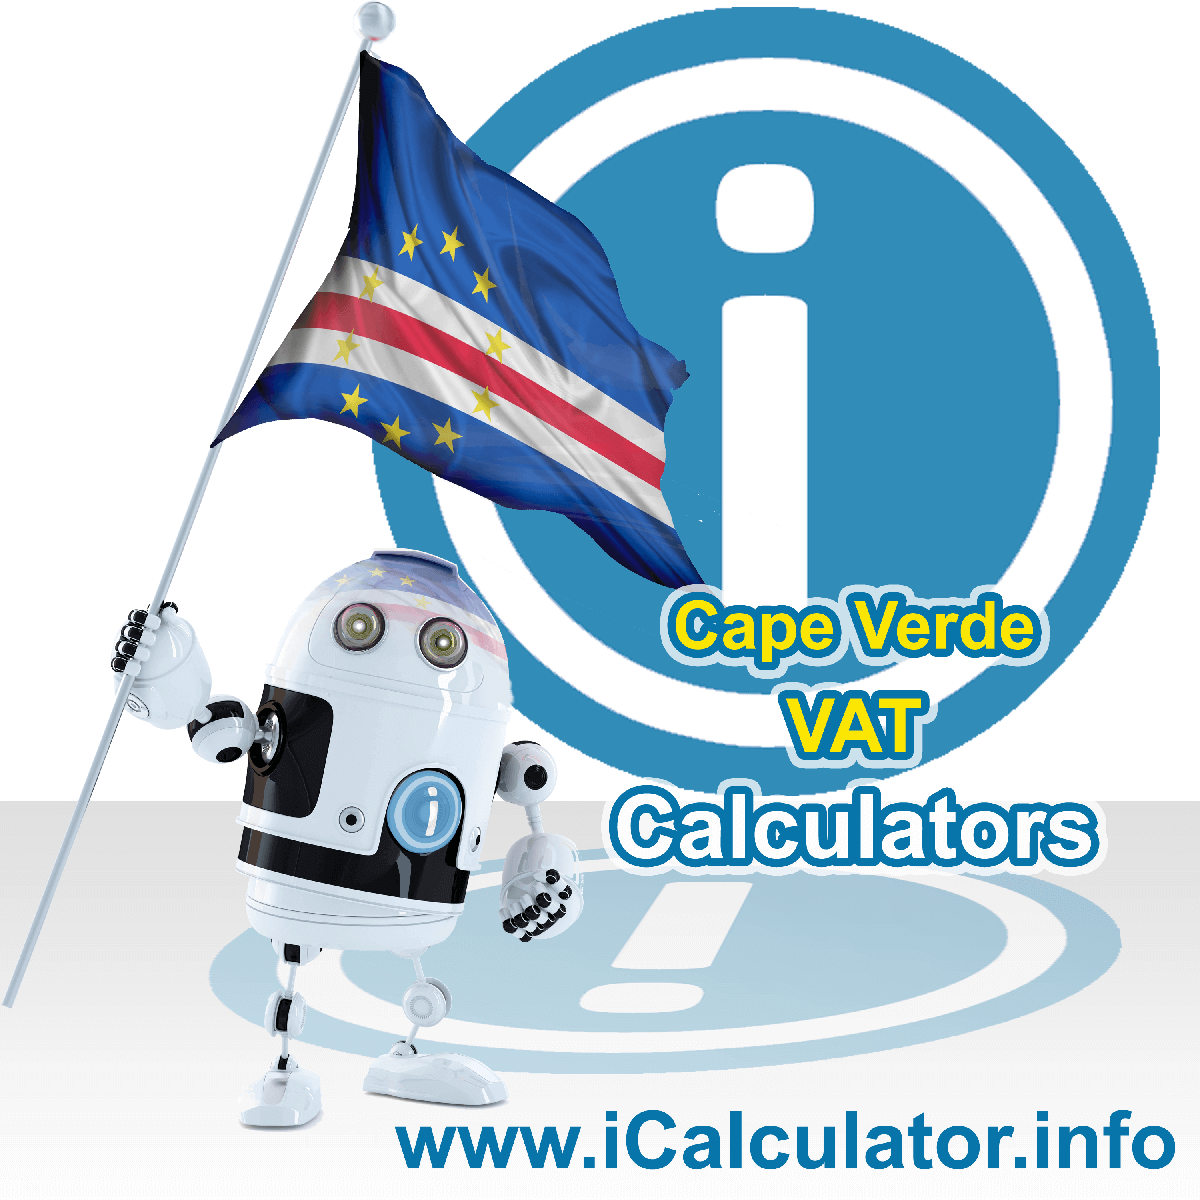 Cape Verde VAT Calculator. This image shows the Cape Verde flag and information relating to the VAT formula used for calculating Value Added Tax in Cape Verde using the Cape Verde VAT Calculator in 2023